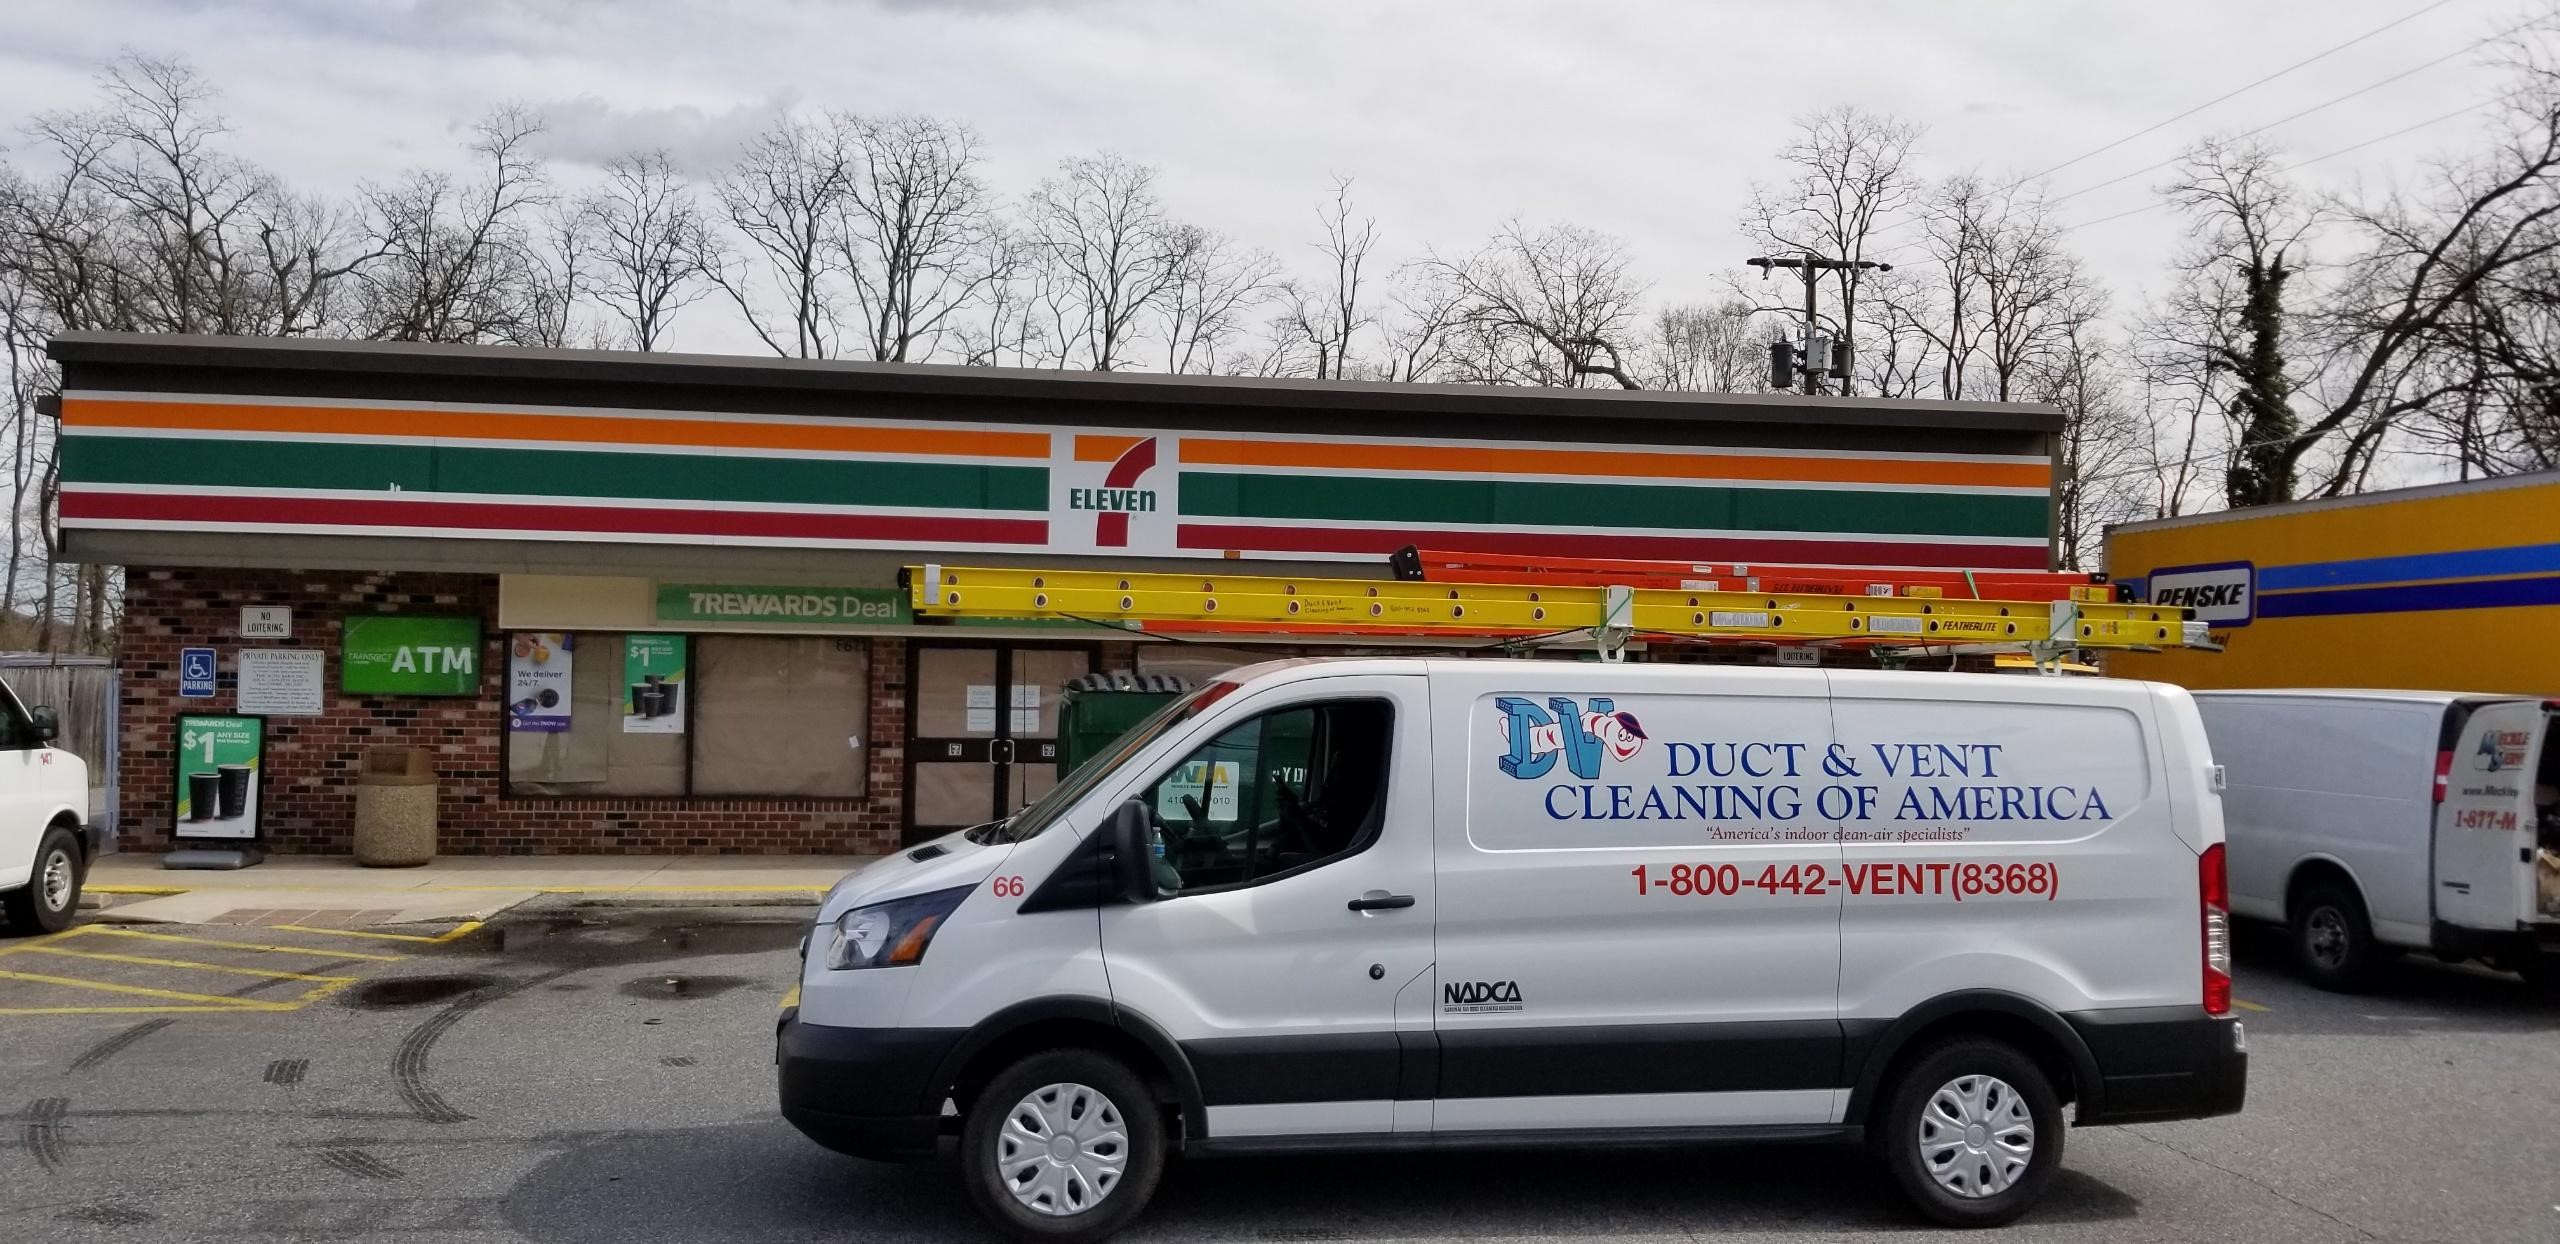 7Eleven Convenience Store Duct Cleaning Towson, MD